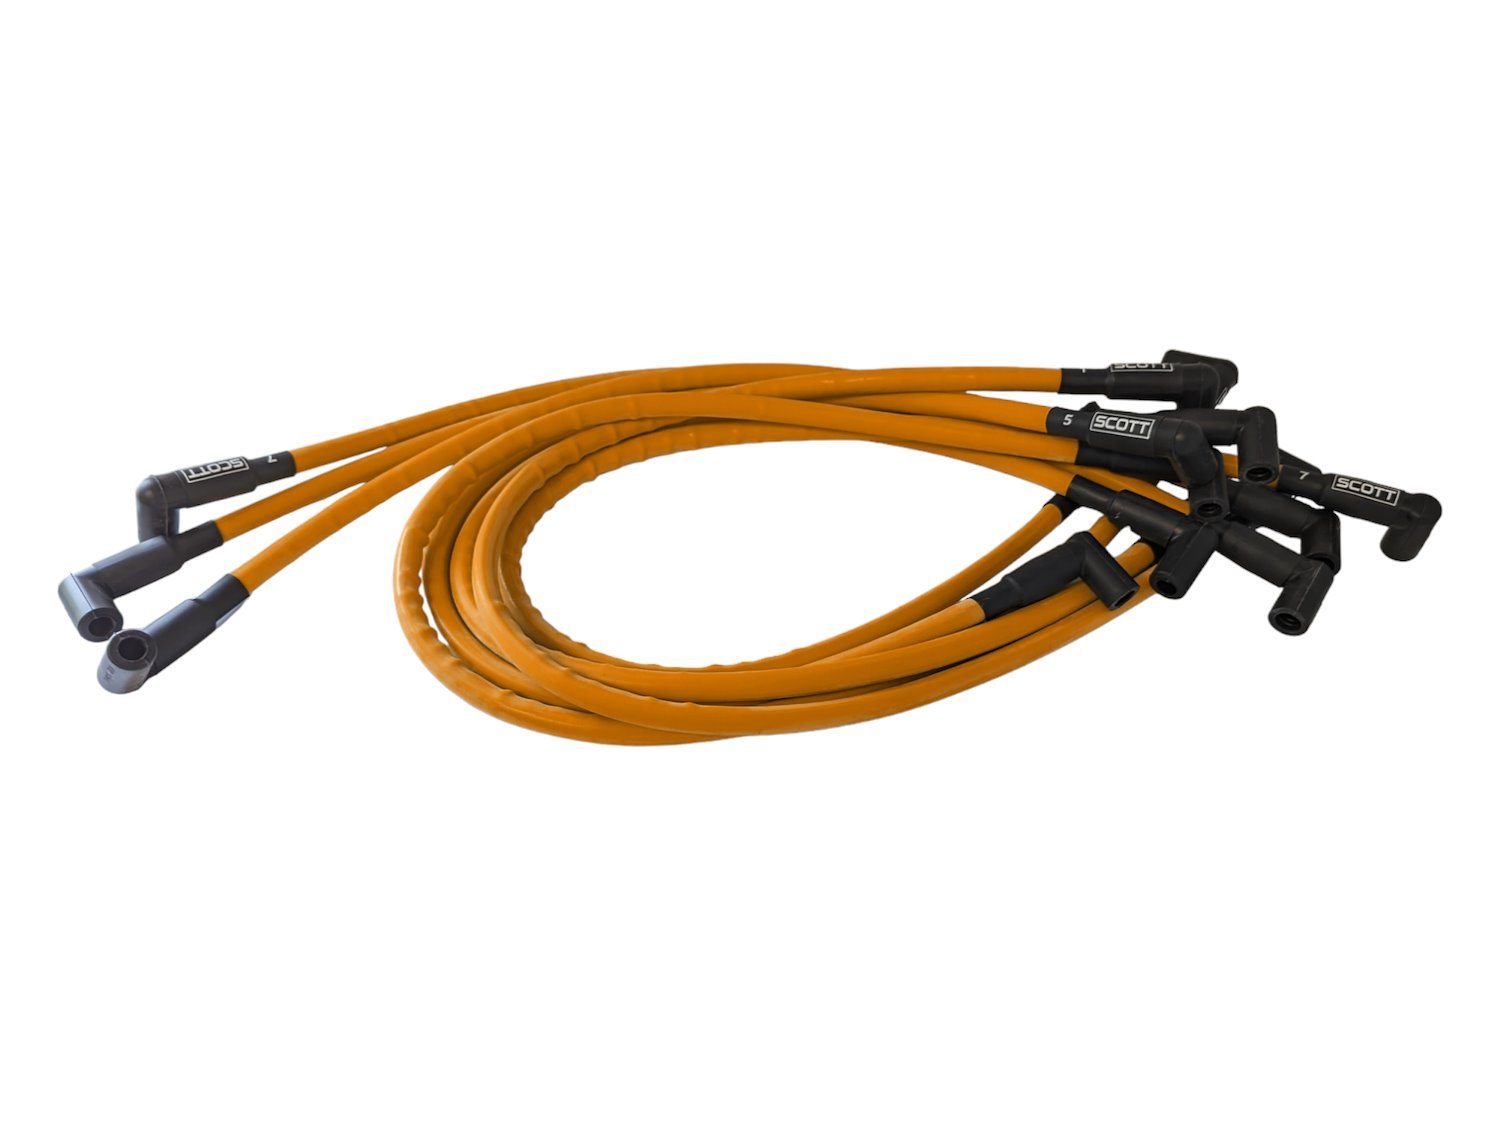 SPW-CH-402-5 High-Performance Silicone-Sleeved Spark Plug Wire Set for Small Block Chevy, Over Valve Cover [Orange]